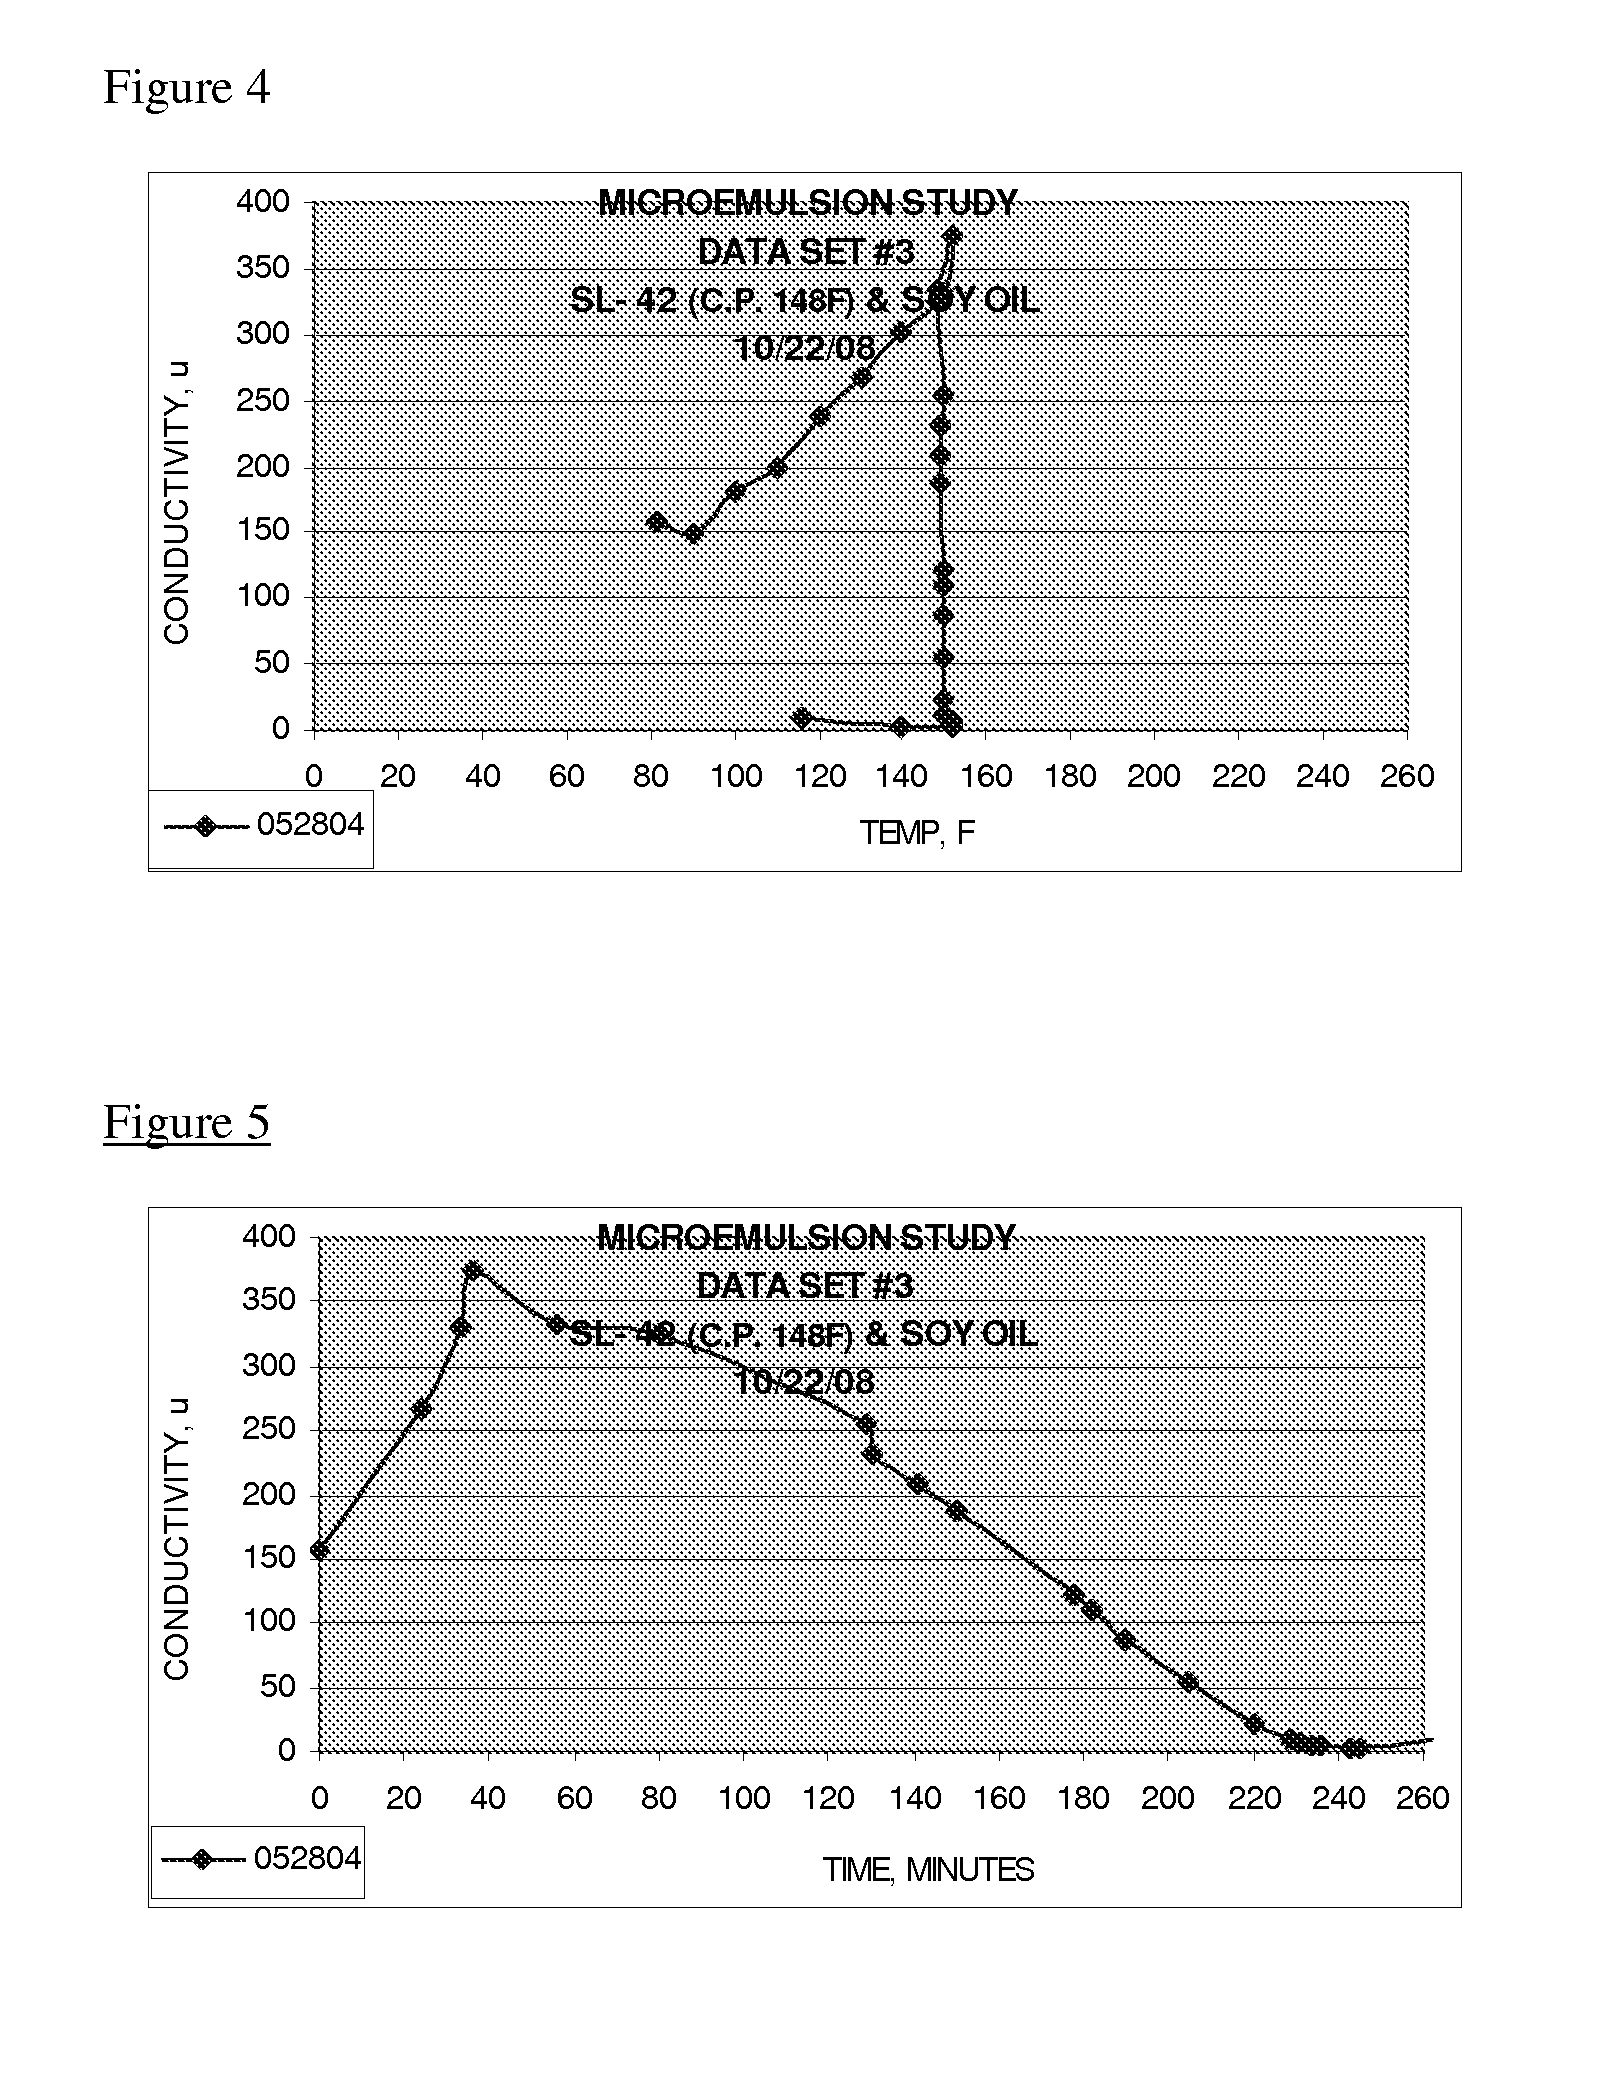 Cleaning compositions and emulsions or microemulsions employing extended chain nonionic surfactants